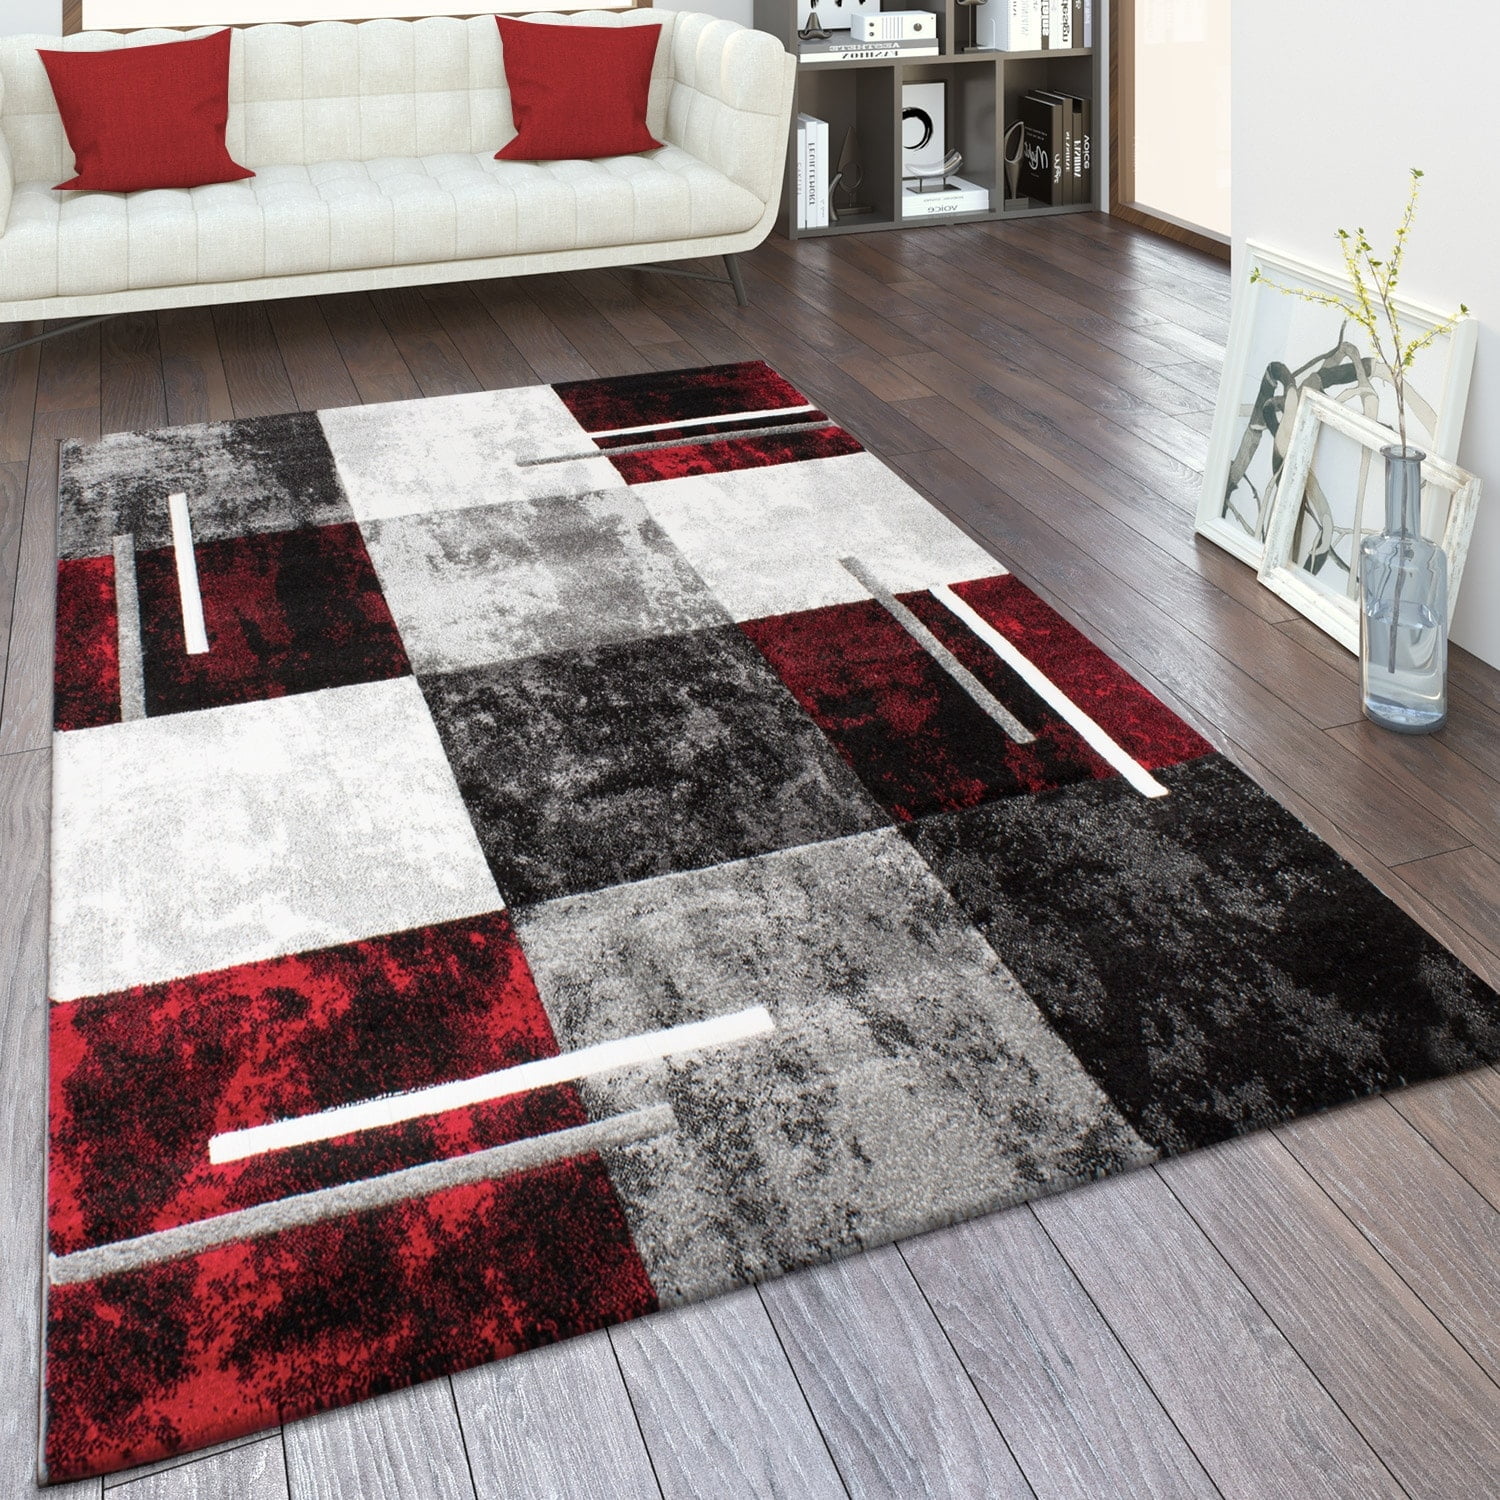 Paco Home Designer Rug with Contour Cut Striped Model in Grey Black and Red  Mixture, Size:2' x 3'7